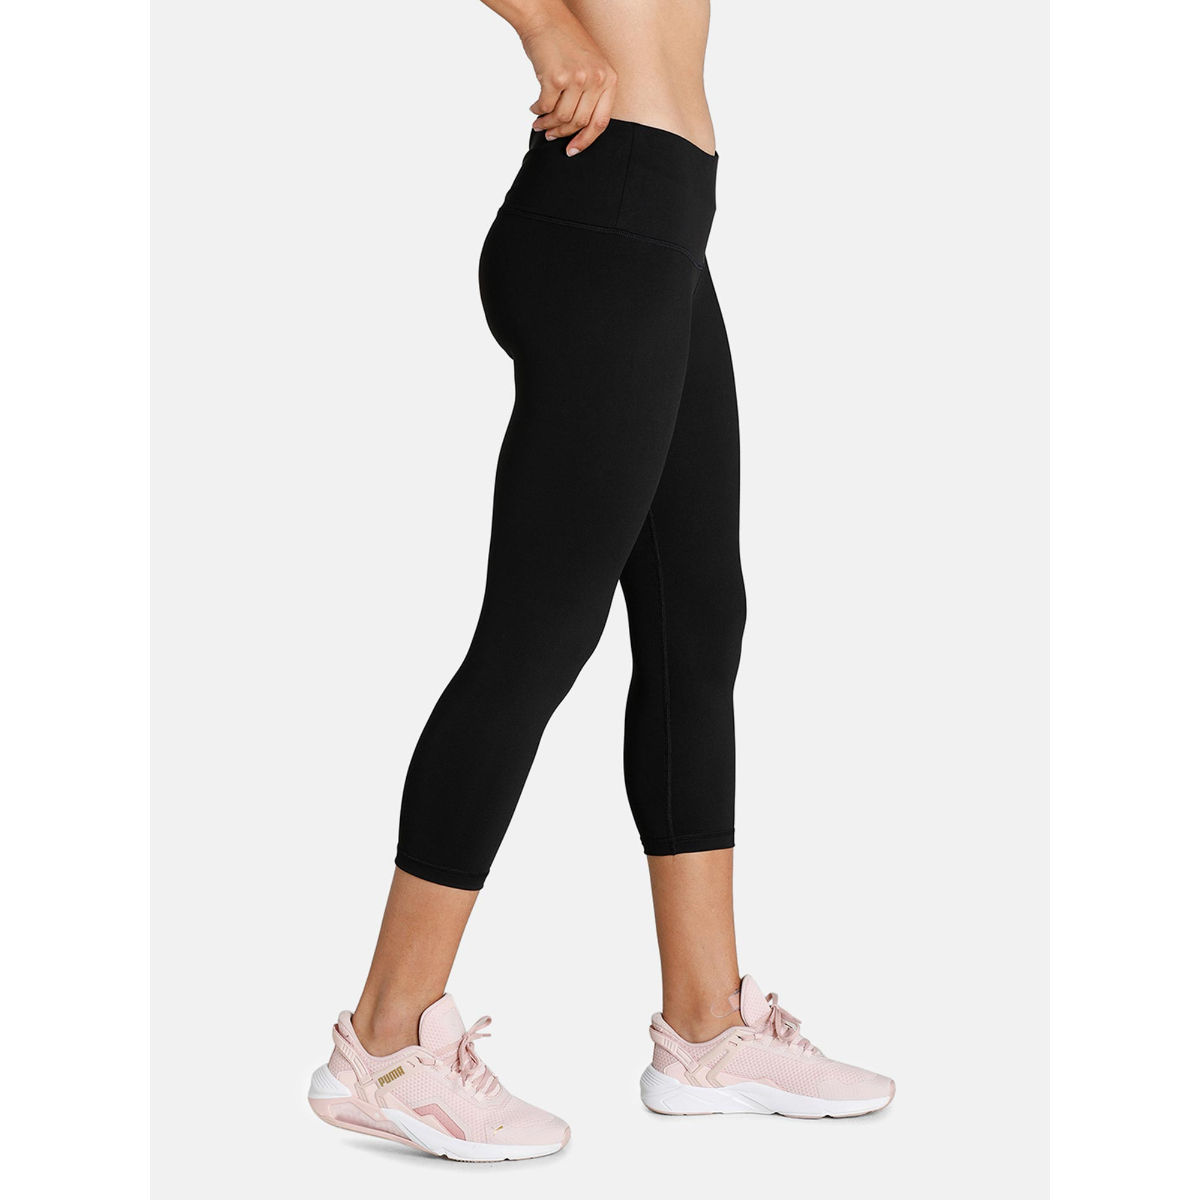 Buy Combo Pack of 3 Skinny Fit 3/4 Capris Leggings for Women Purple Bottle  Green Ash Online In India At Discounted Prices